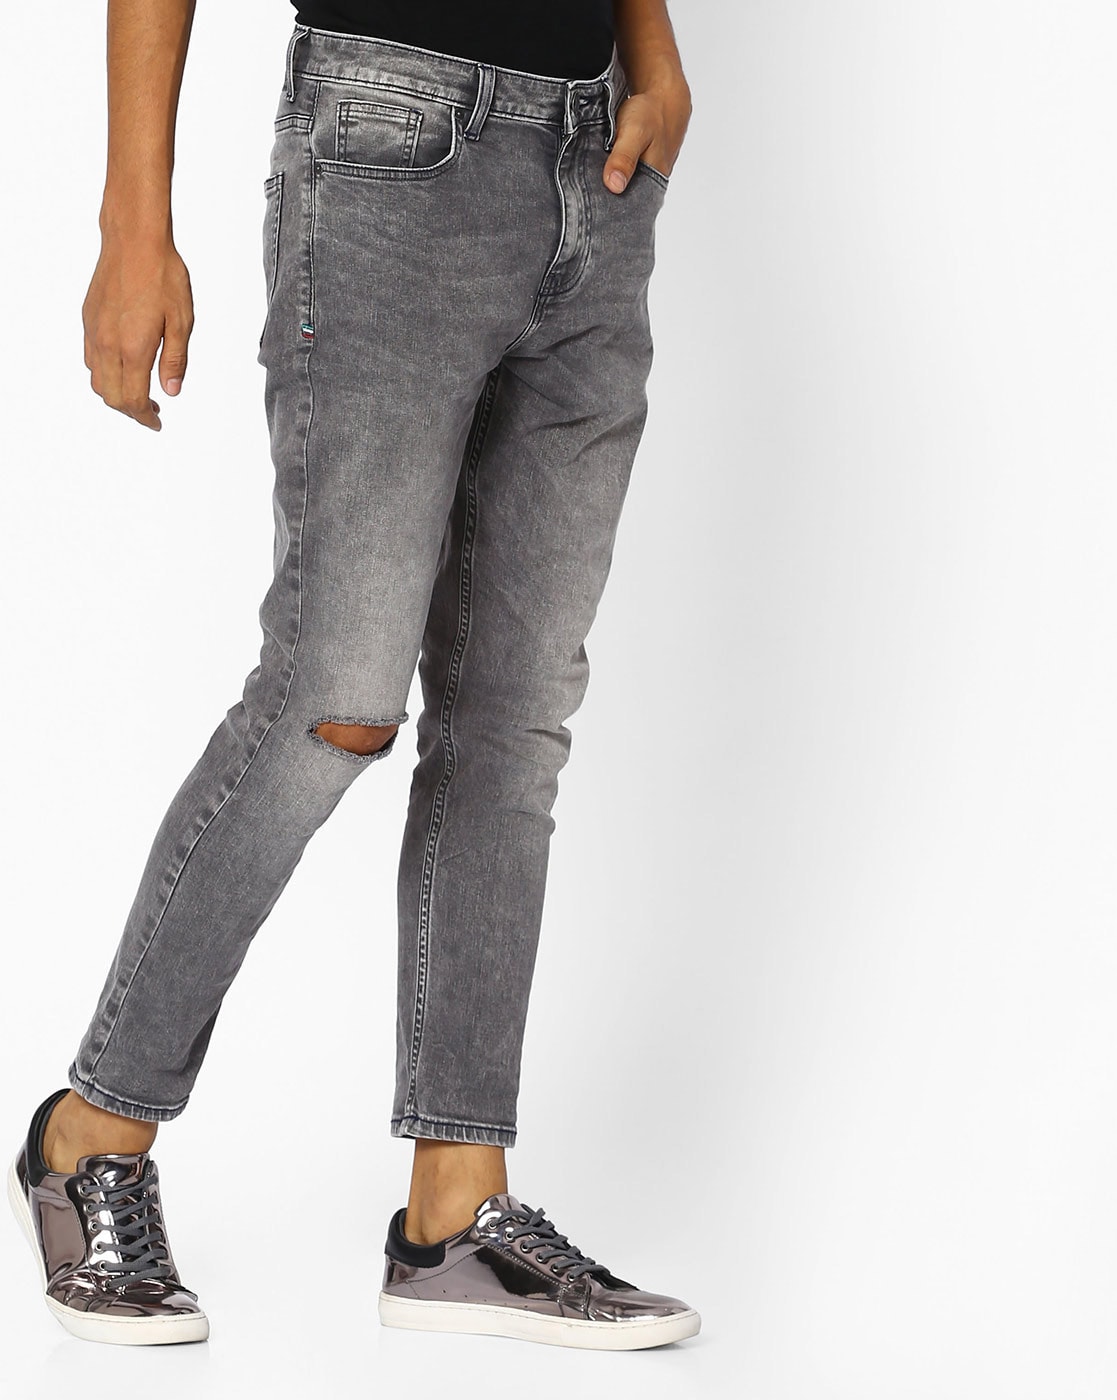 Mens Jeans  Buy Jeans Pants for Men at Best Prices  RickRogue  Rick Rogue